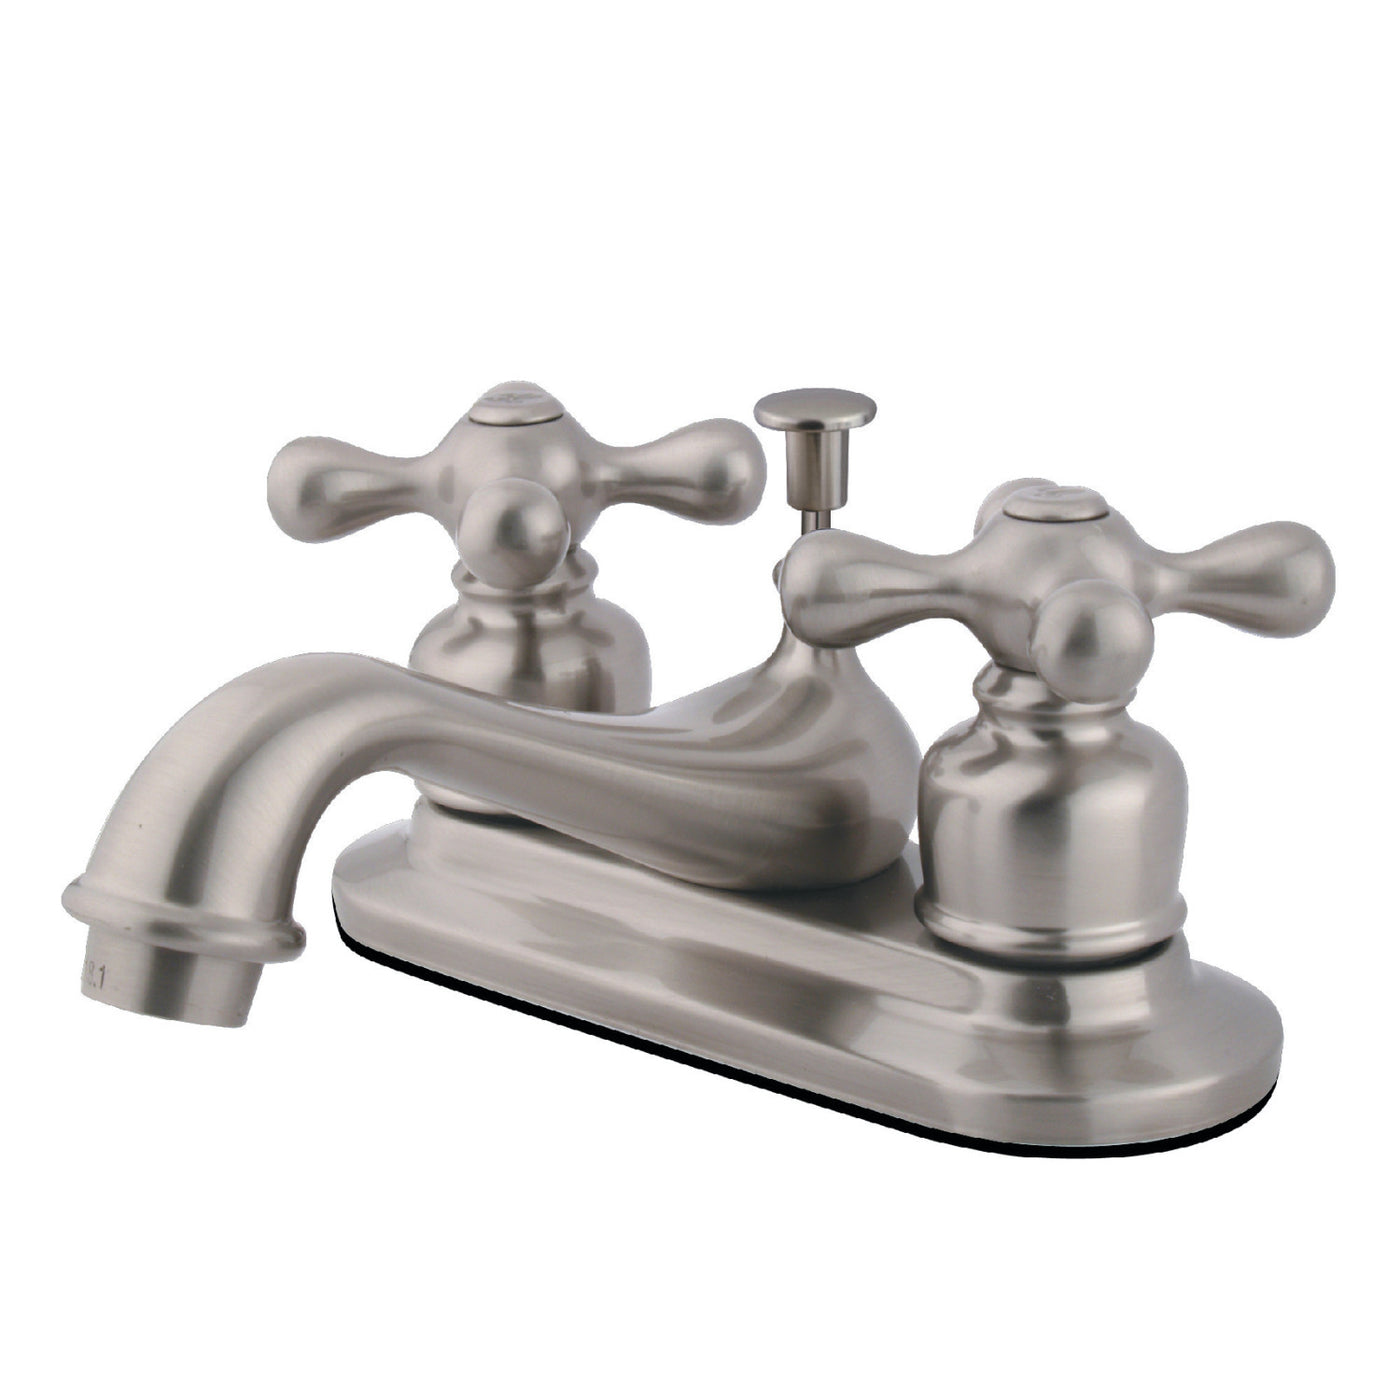 Elements of Design EB608AX 4-Inch Centerset Bathroom Faucet, Brushed Nickel